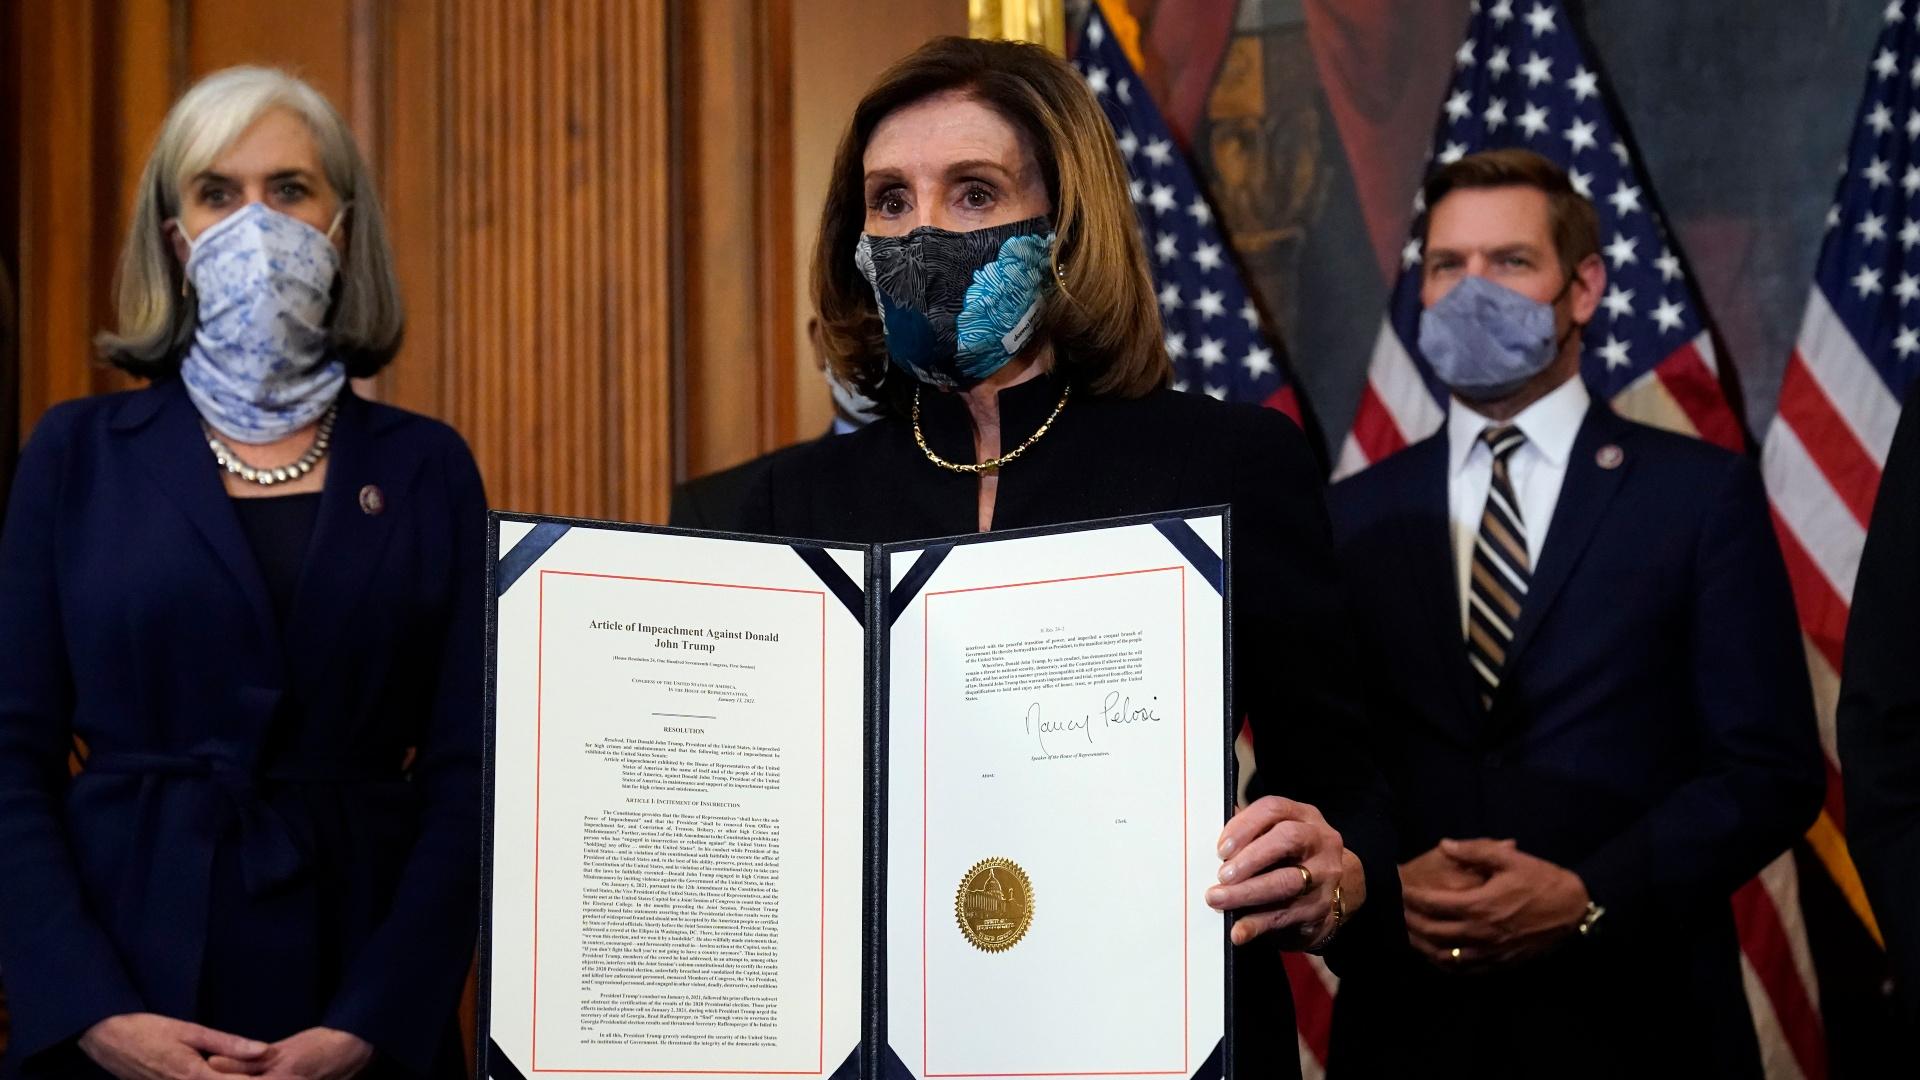 House Speaker Nancy Pelosi of Calif., displays the signed article of impeachment against President Donald Trump in an engrossment ceremony before transmission to the Senate for trial on Capitol Hill, in Washington, Wednesday, Jan. 13, 2021. (AP Photo / Alex Brandon)